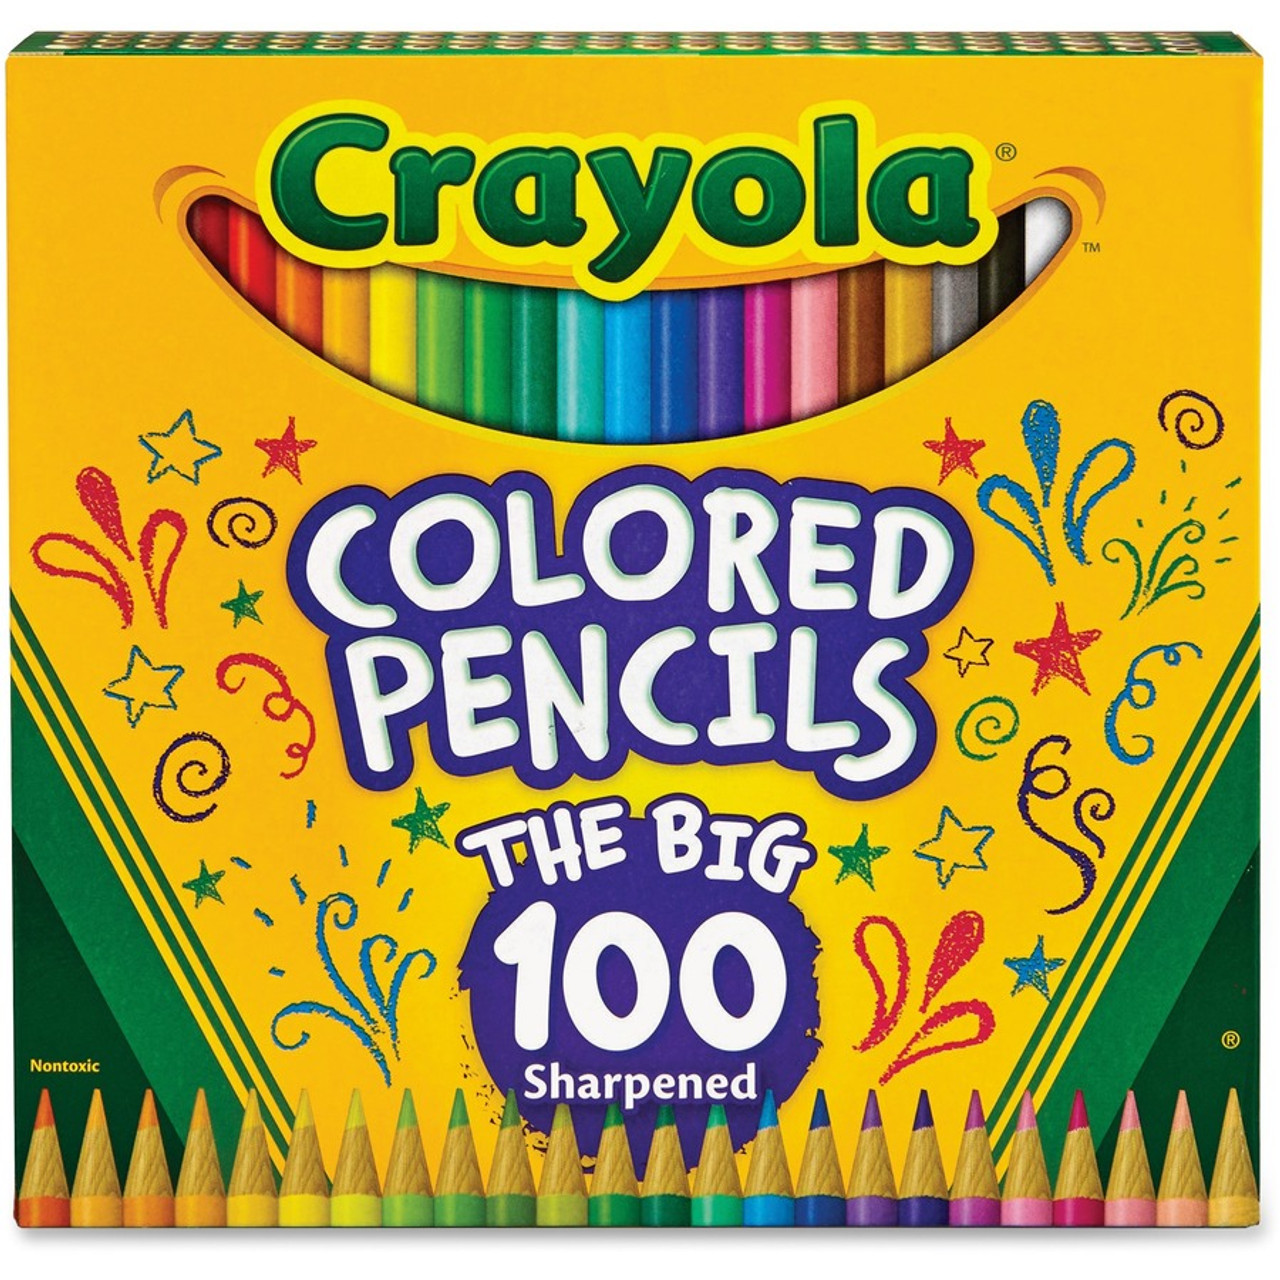 Crayola 100 Colored Pencils: What's Inside the Box  Colored pencils,  Crayola, Crayola colored pencils